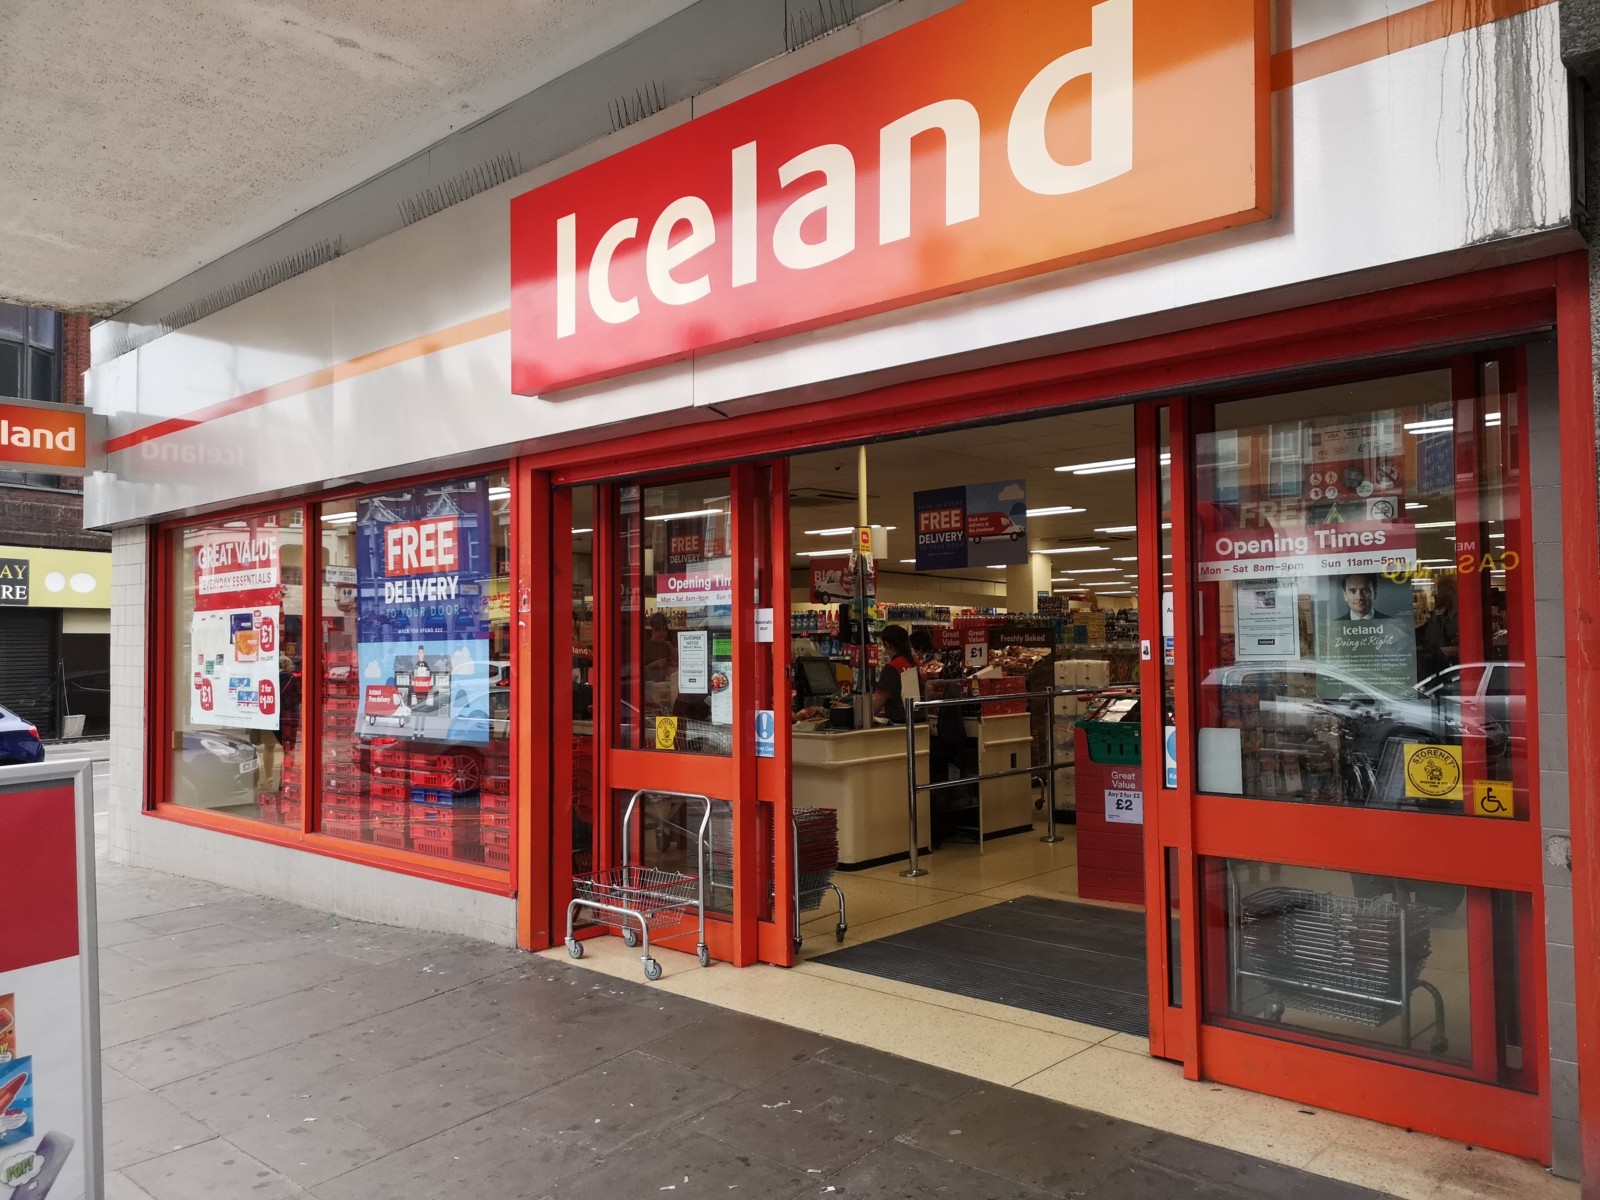 Iceland offers 10% discounts for over-60s in UK first, The Manc